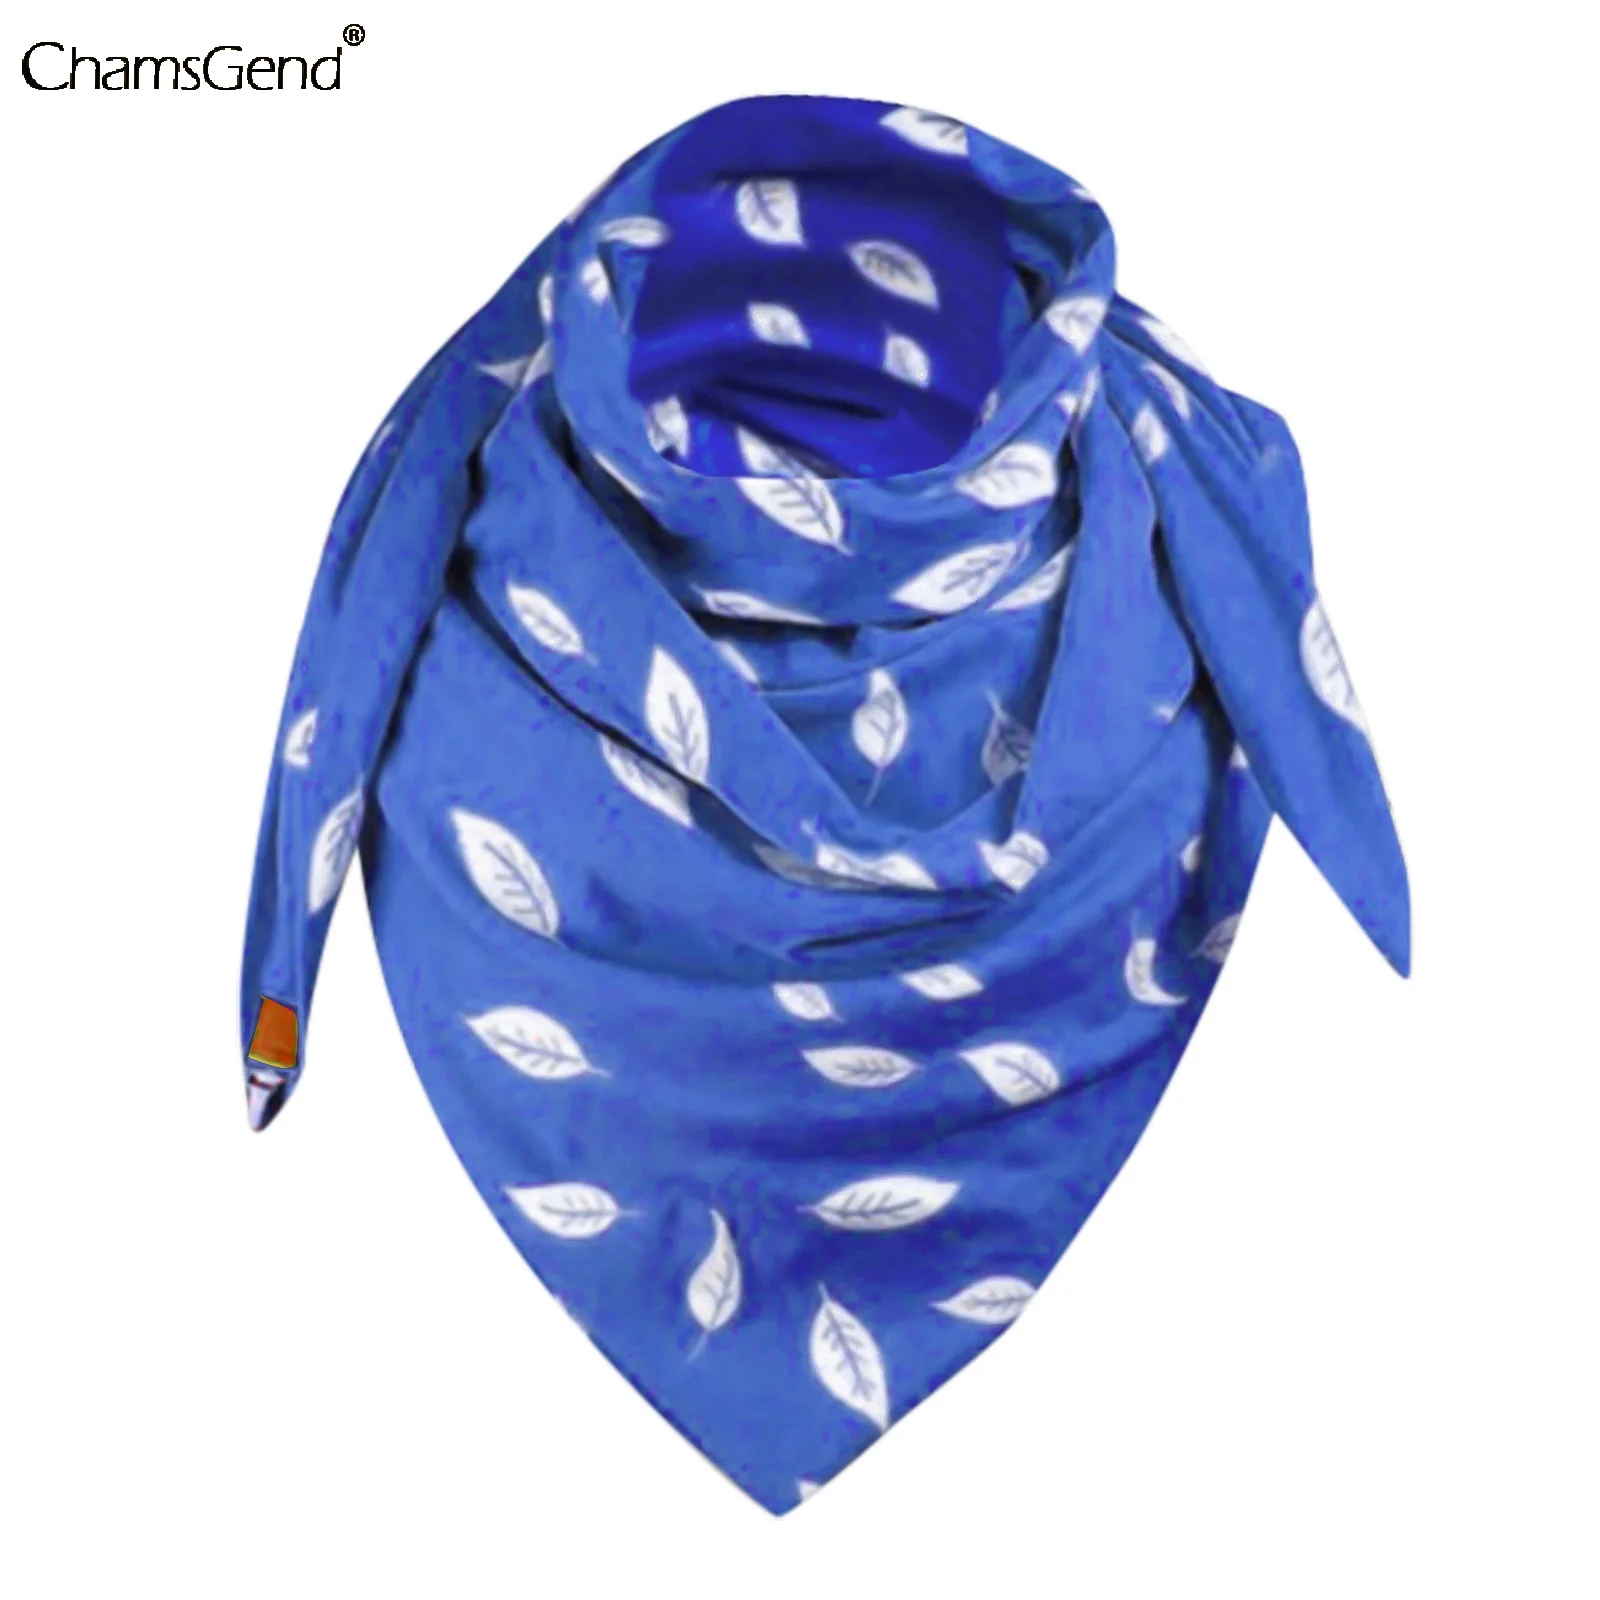 

Leaf Print Women Winter Warm Cashmere Scarf Pashmina Neck Warmers Shawl Wraps Neckerchief Face Cover Women Scarves with Buckle